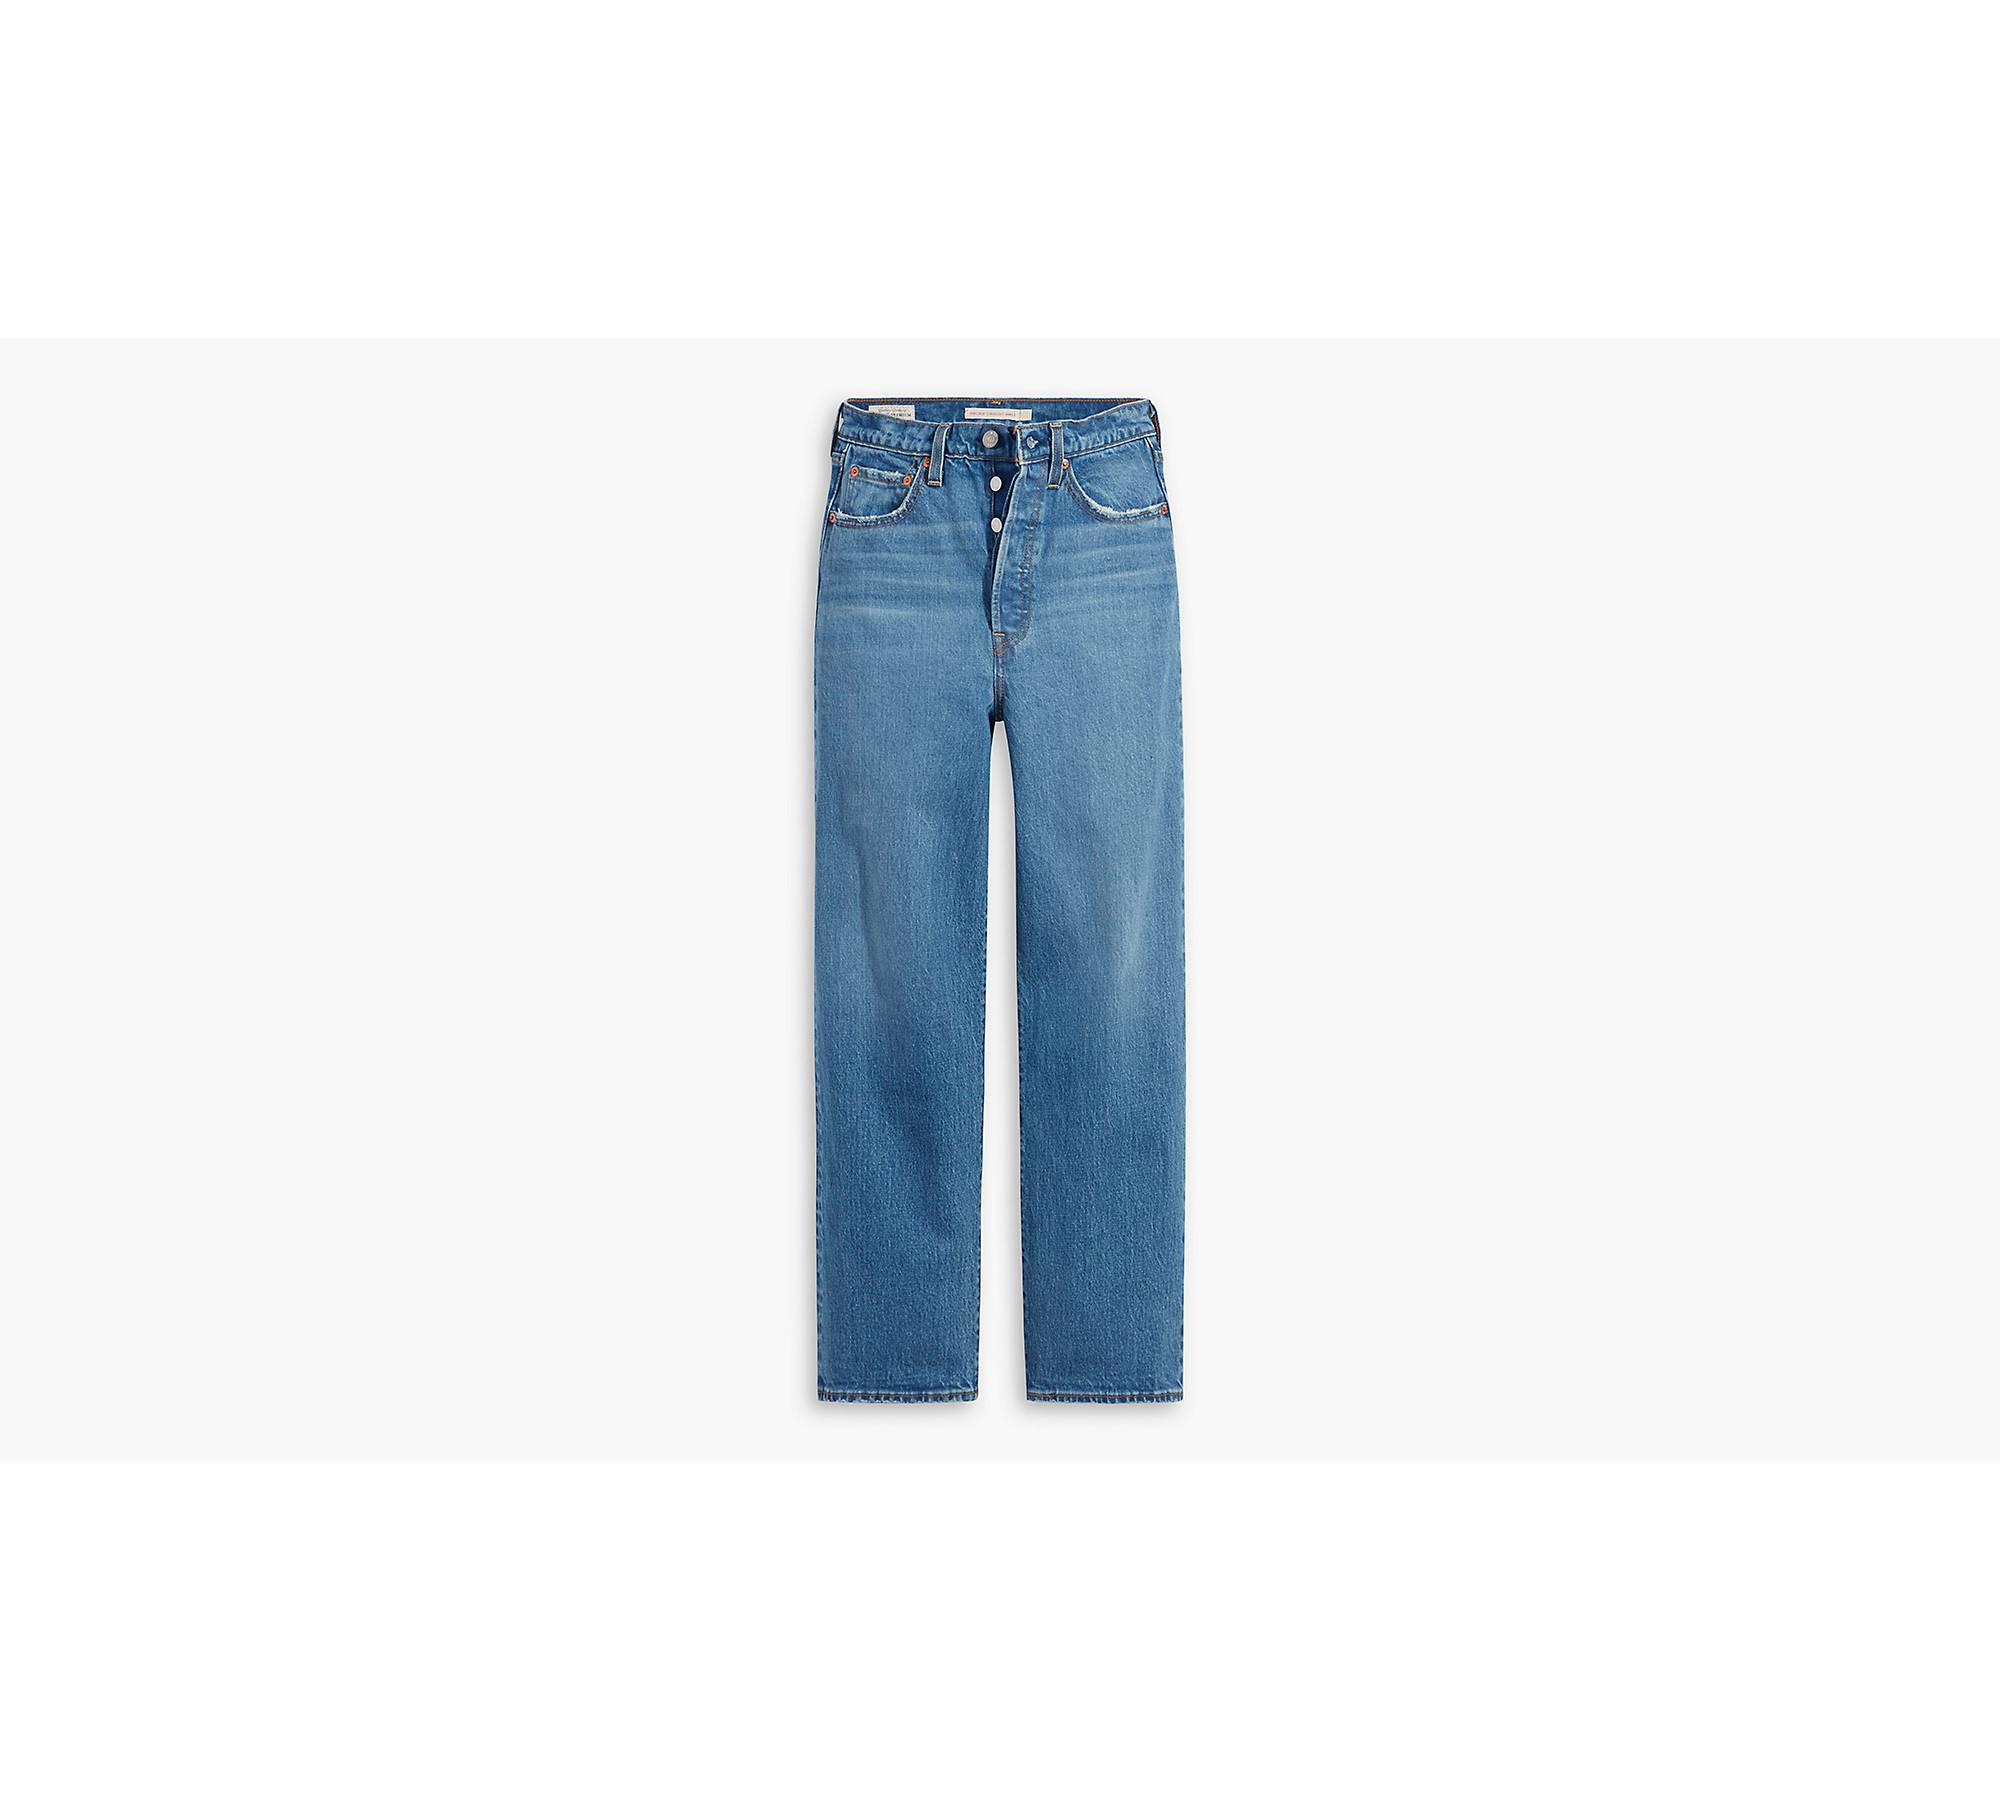 Levi's - Ribcage Straight Ankle - Cool Blue Popsicle - - Archer +